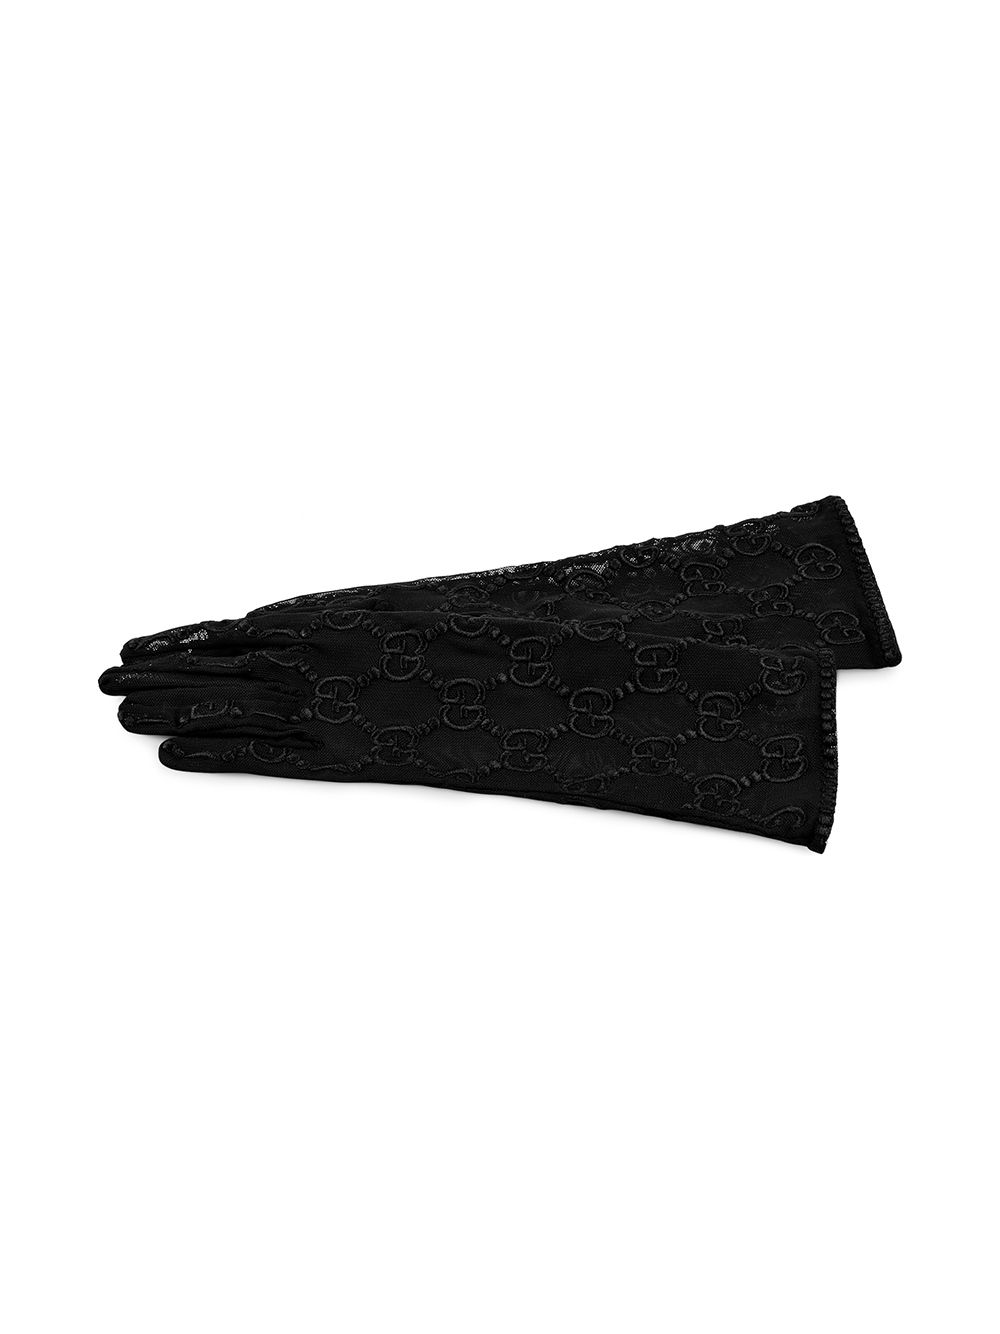 Compare prices for Tulle gloves with Gucci Strawberry motif  (5783253SC029000) in official stores